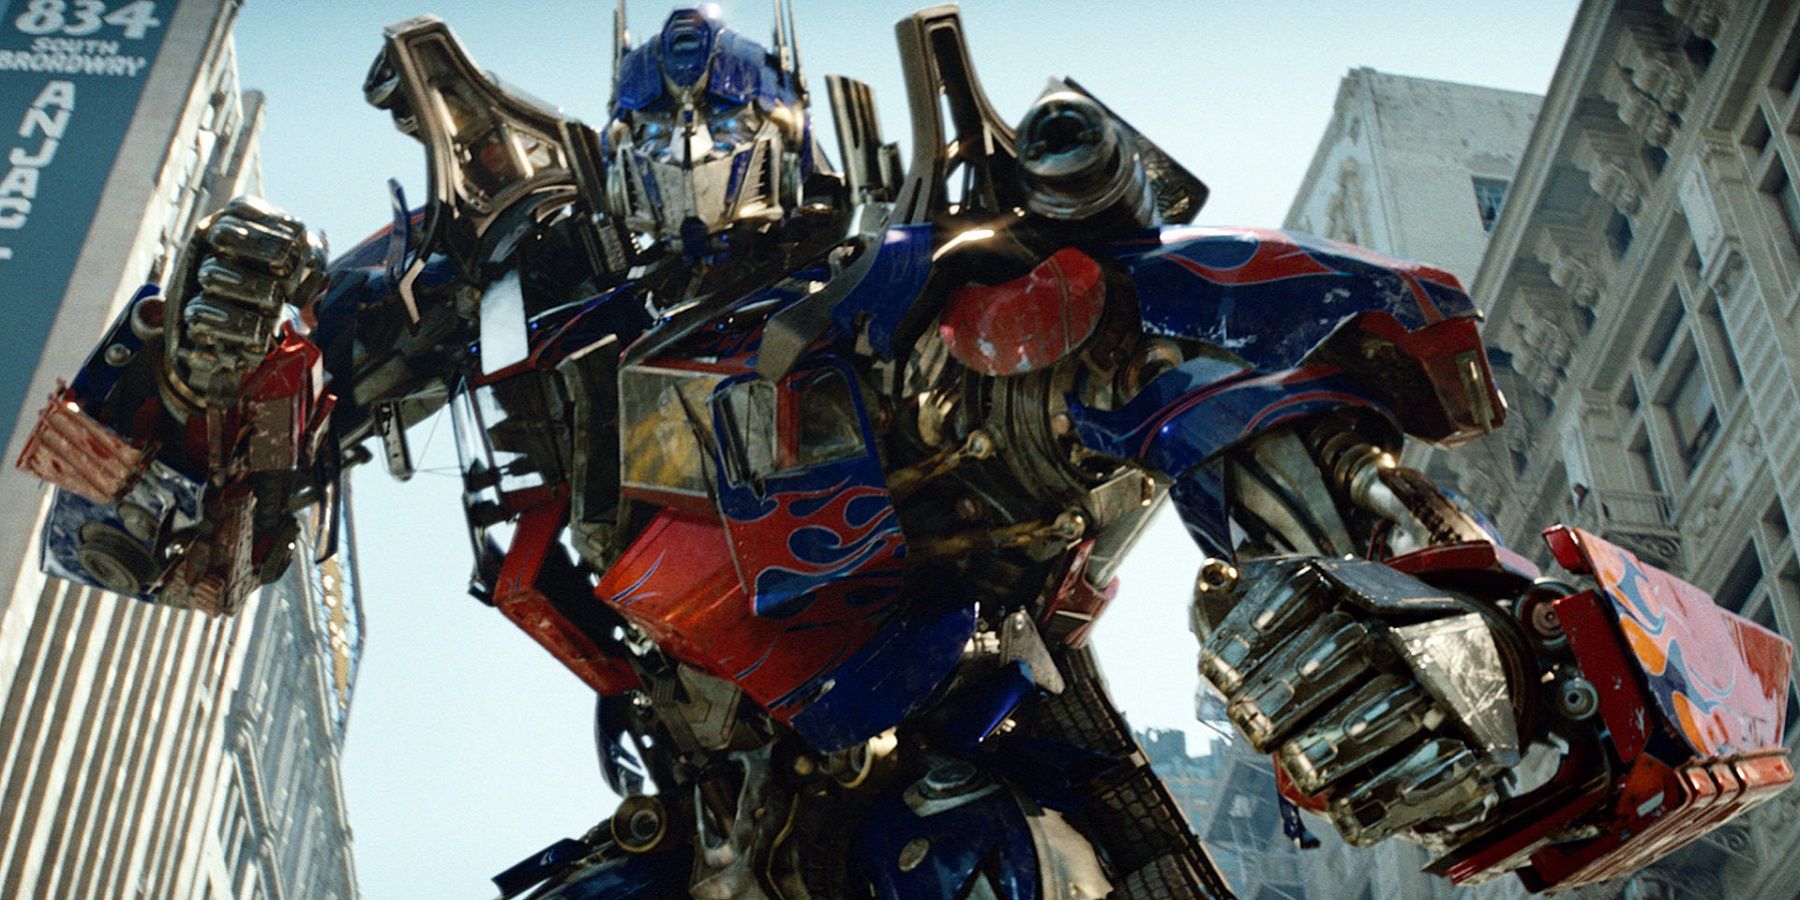 Why Michael Bay Didn’t Want To Do A Transformers Movie (At First)